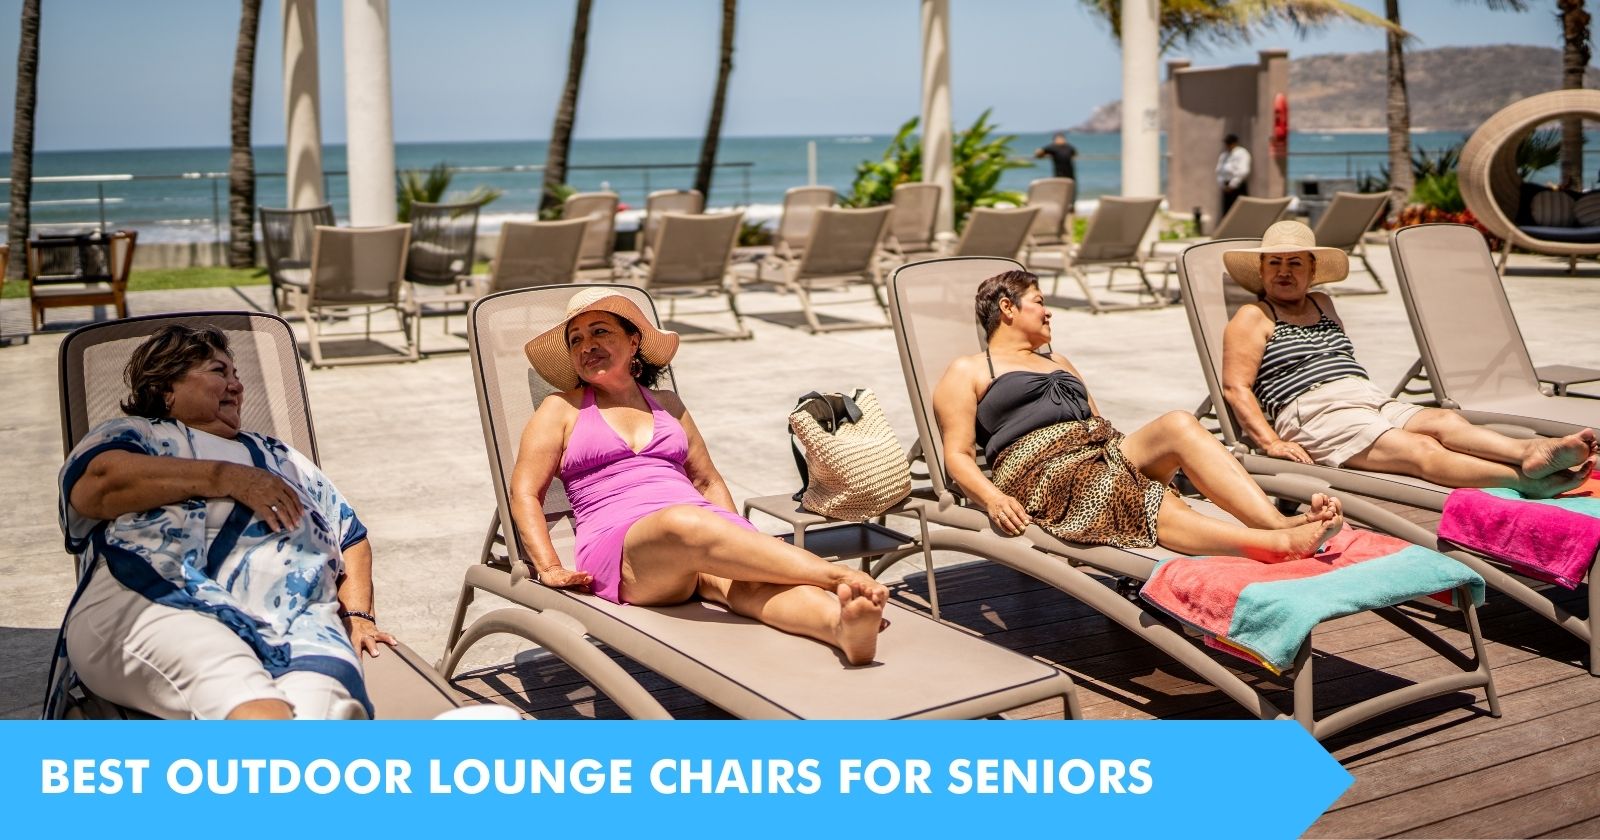 Best Outdoor Lounge Chairs for Seniors